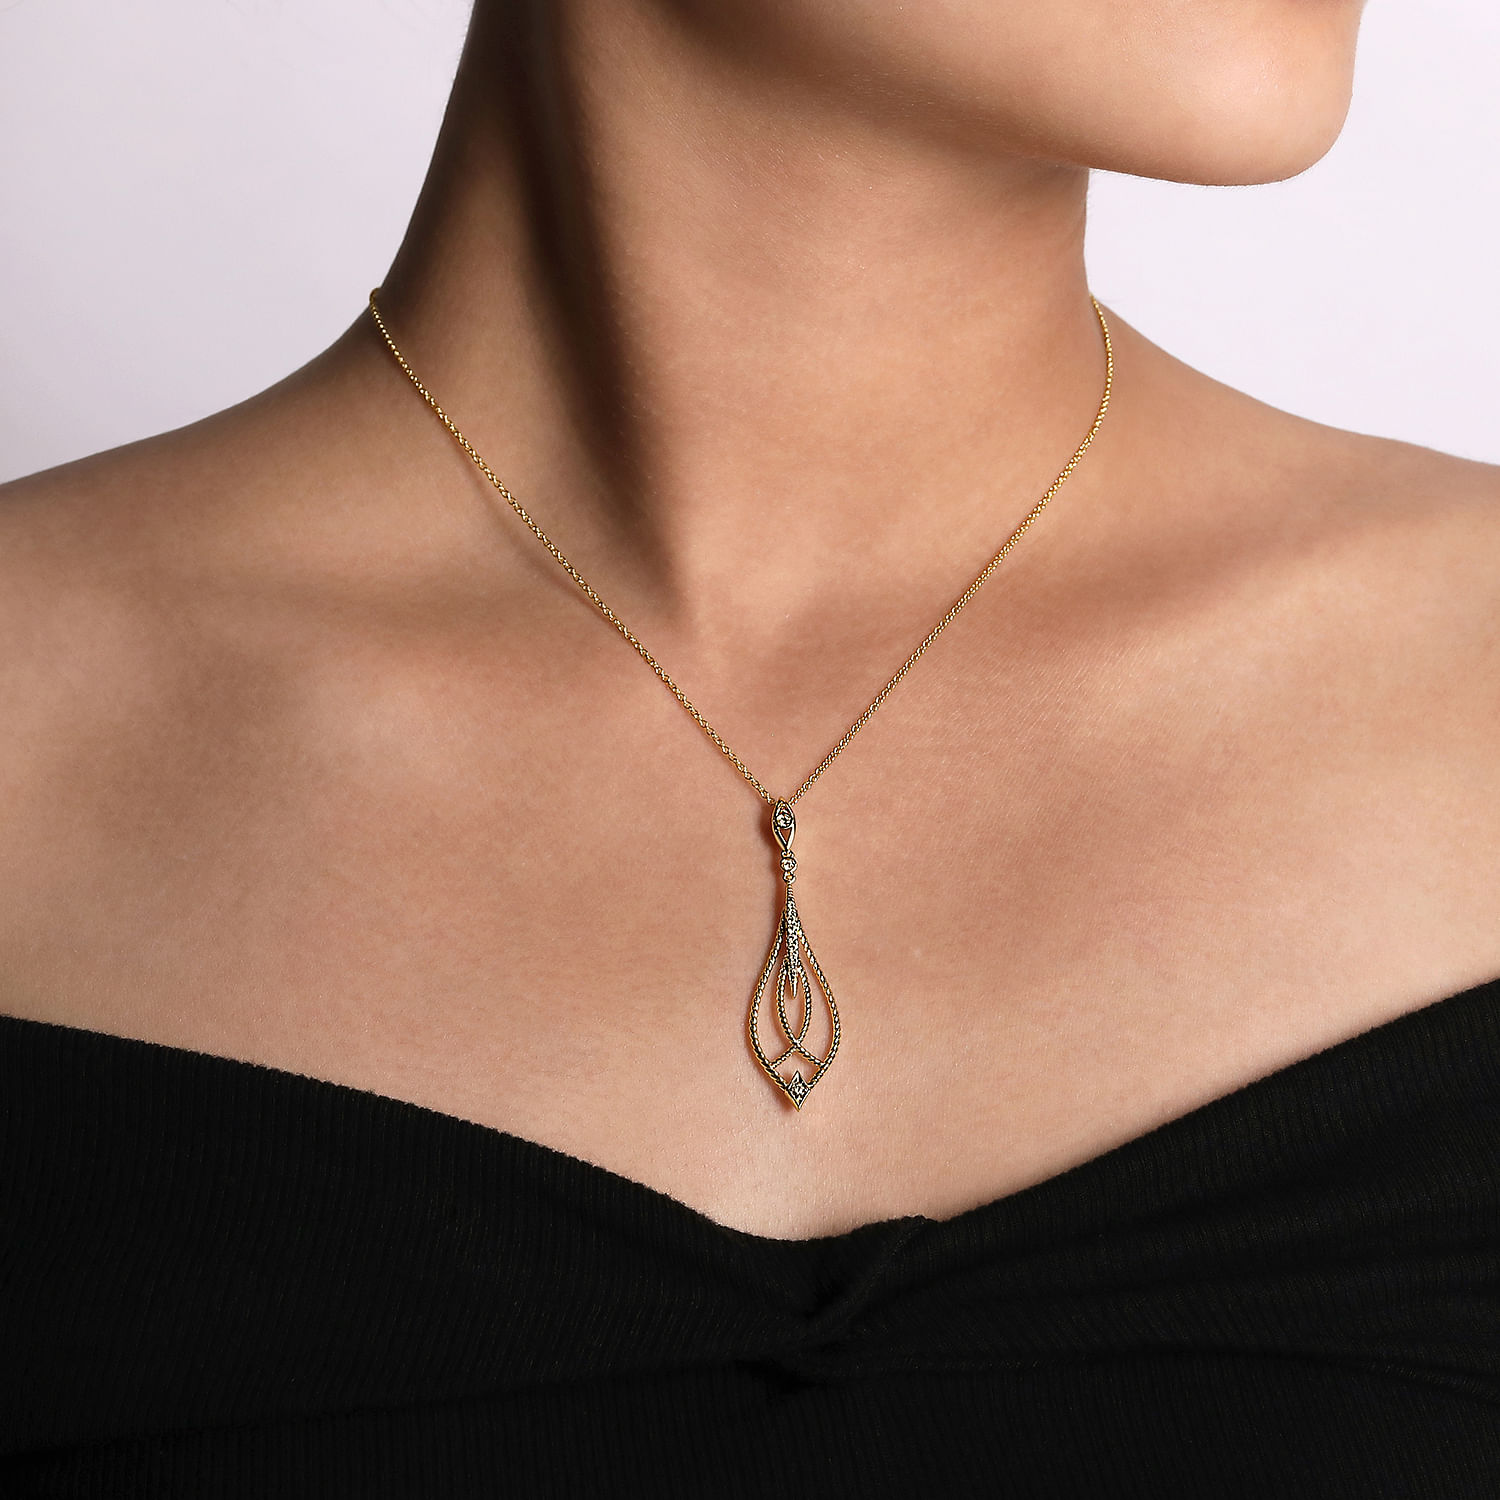 14K Yellow Gold Open Teardrop Pendant Necklace with Diamond Accents